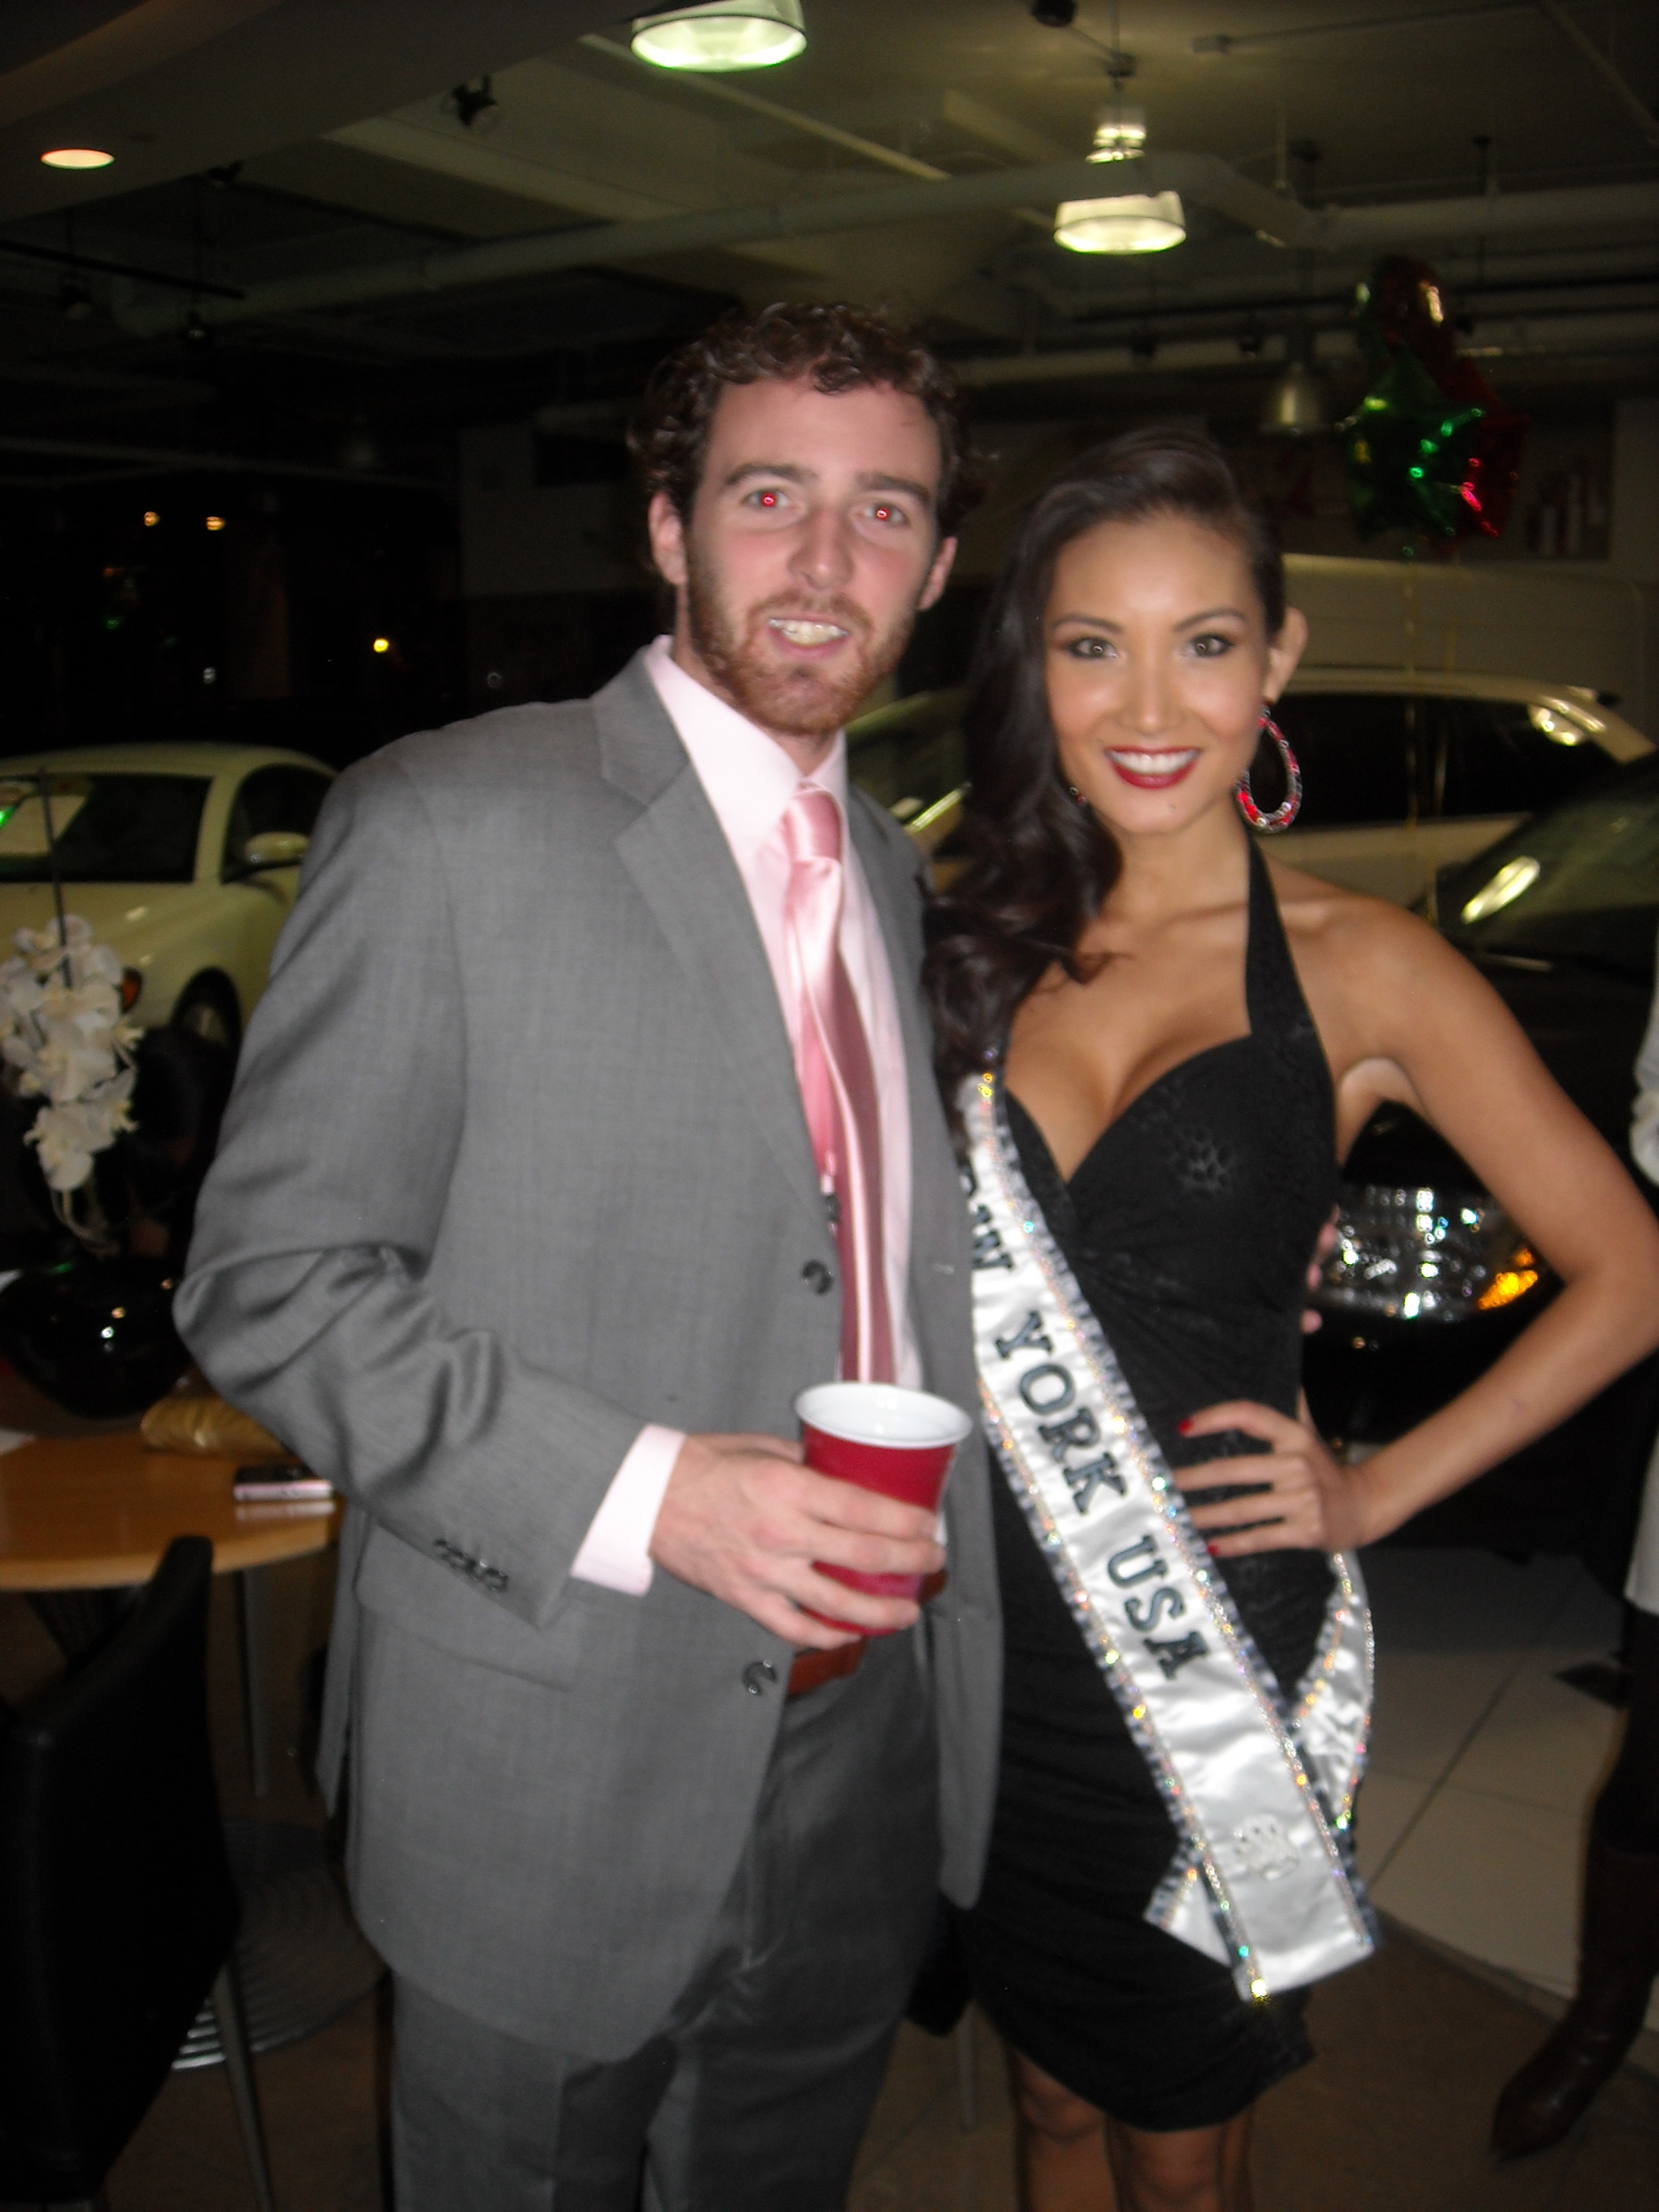 Jim Ford and Ms. New York at the Fashion Reporter party